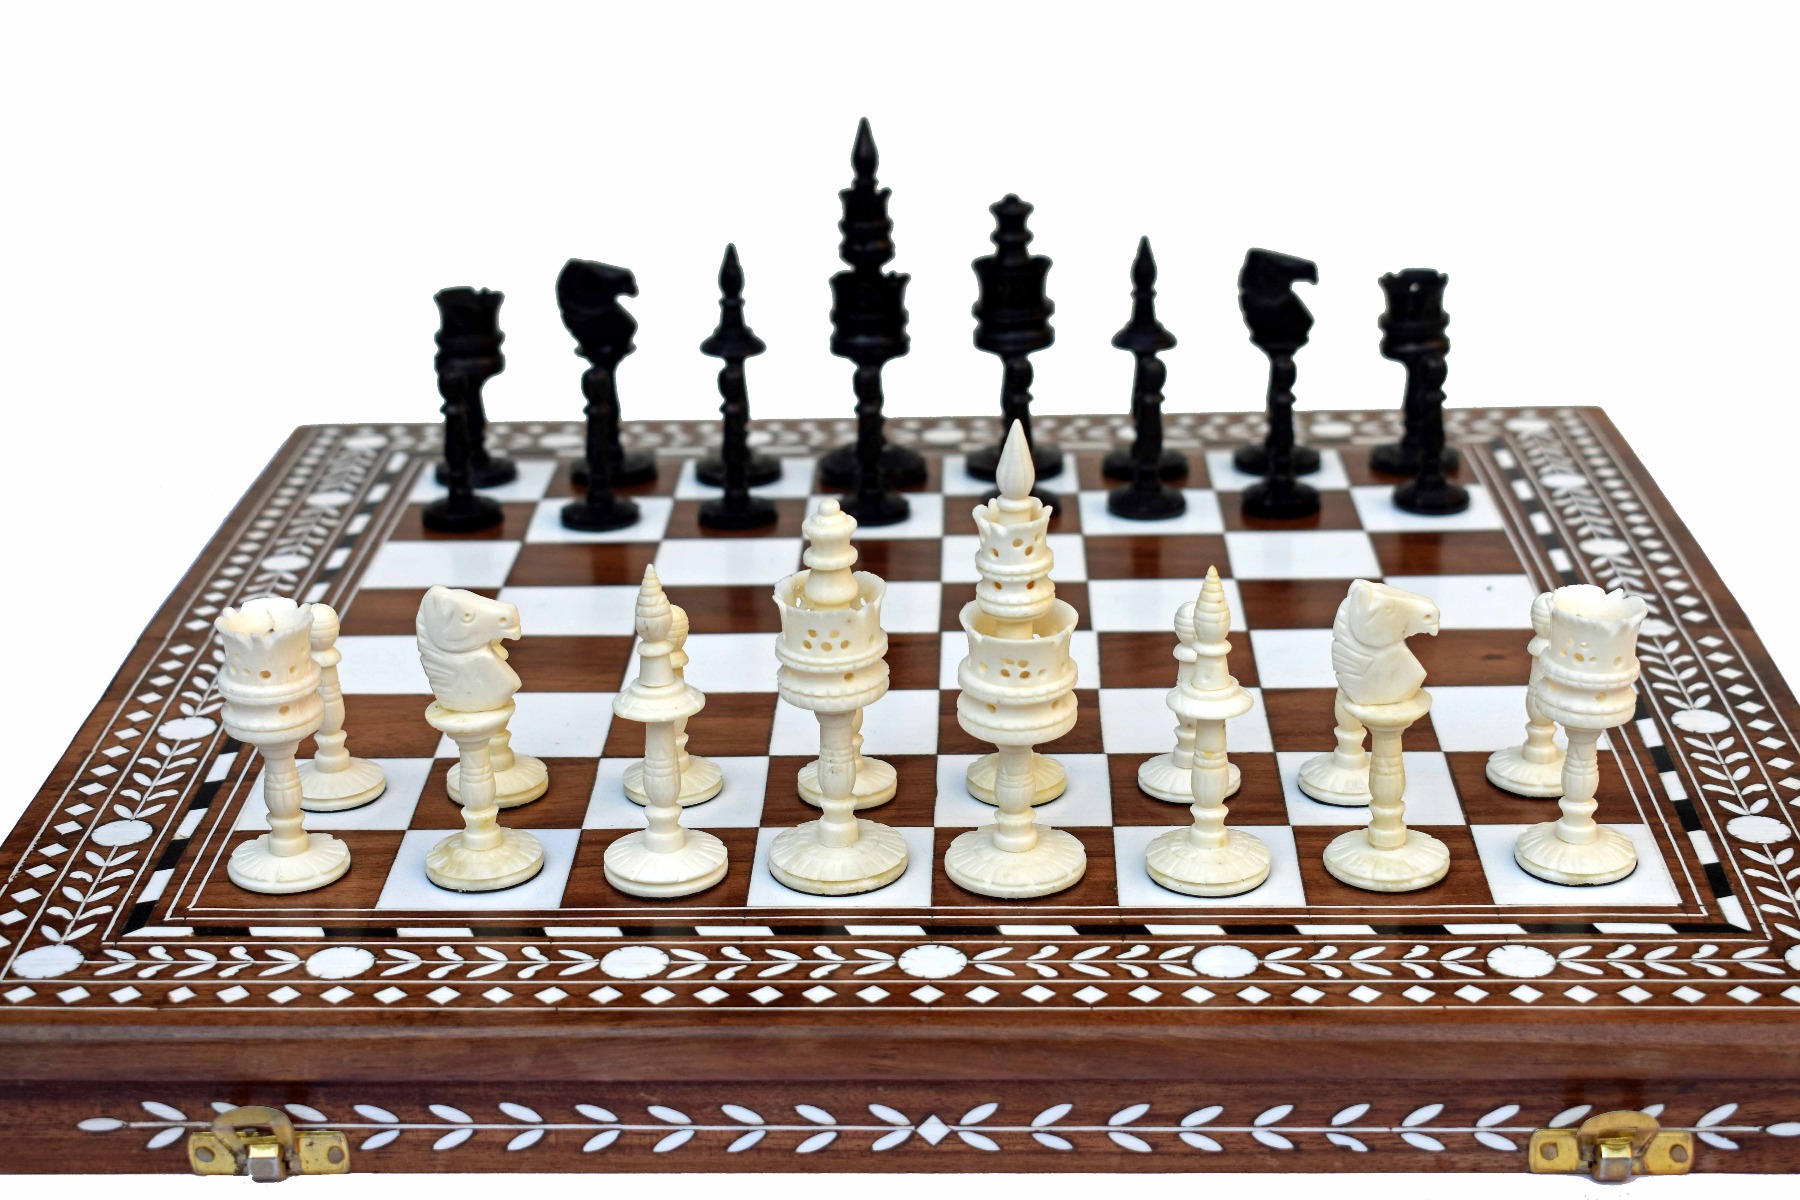 The Heritage Foldable handcrafted Chess Board , Sheesham wood with Rare  Inlay workmanship